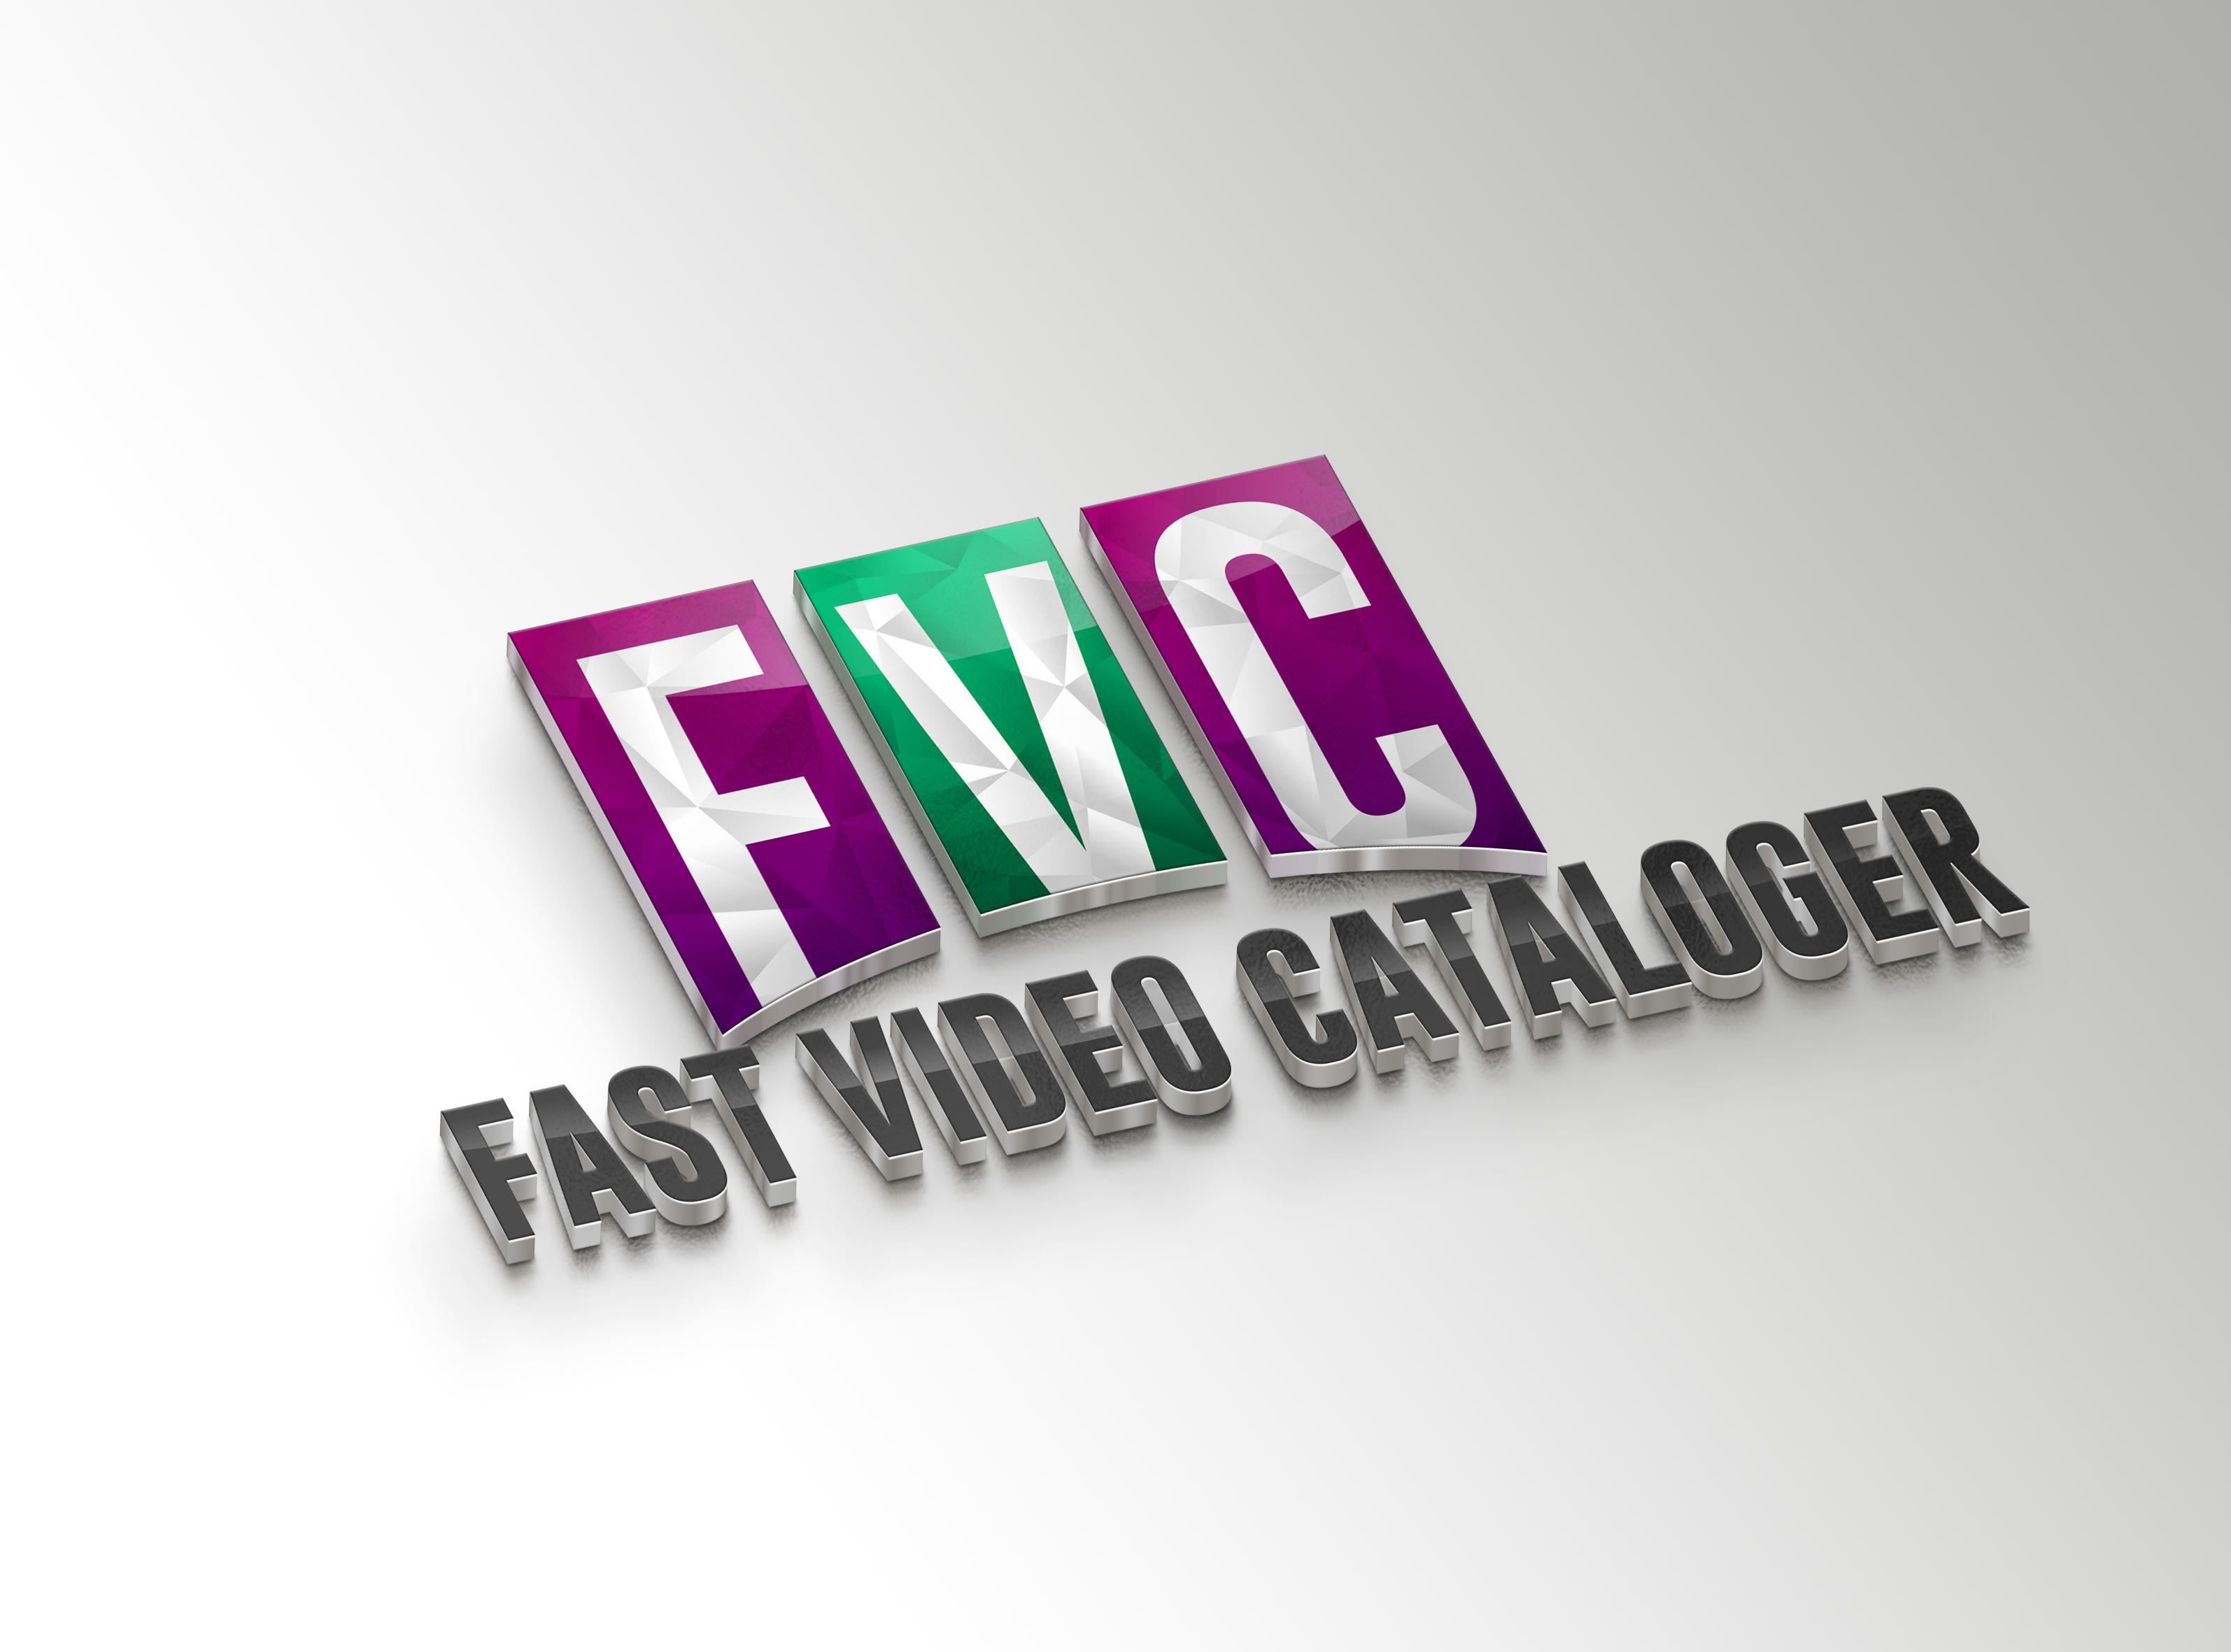 Fast Video Cataloger 8.5.5.0 instal the last version for windows